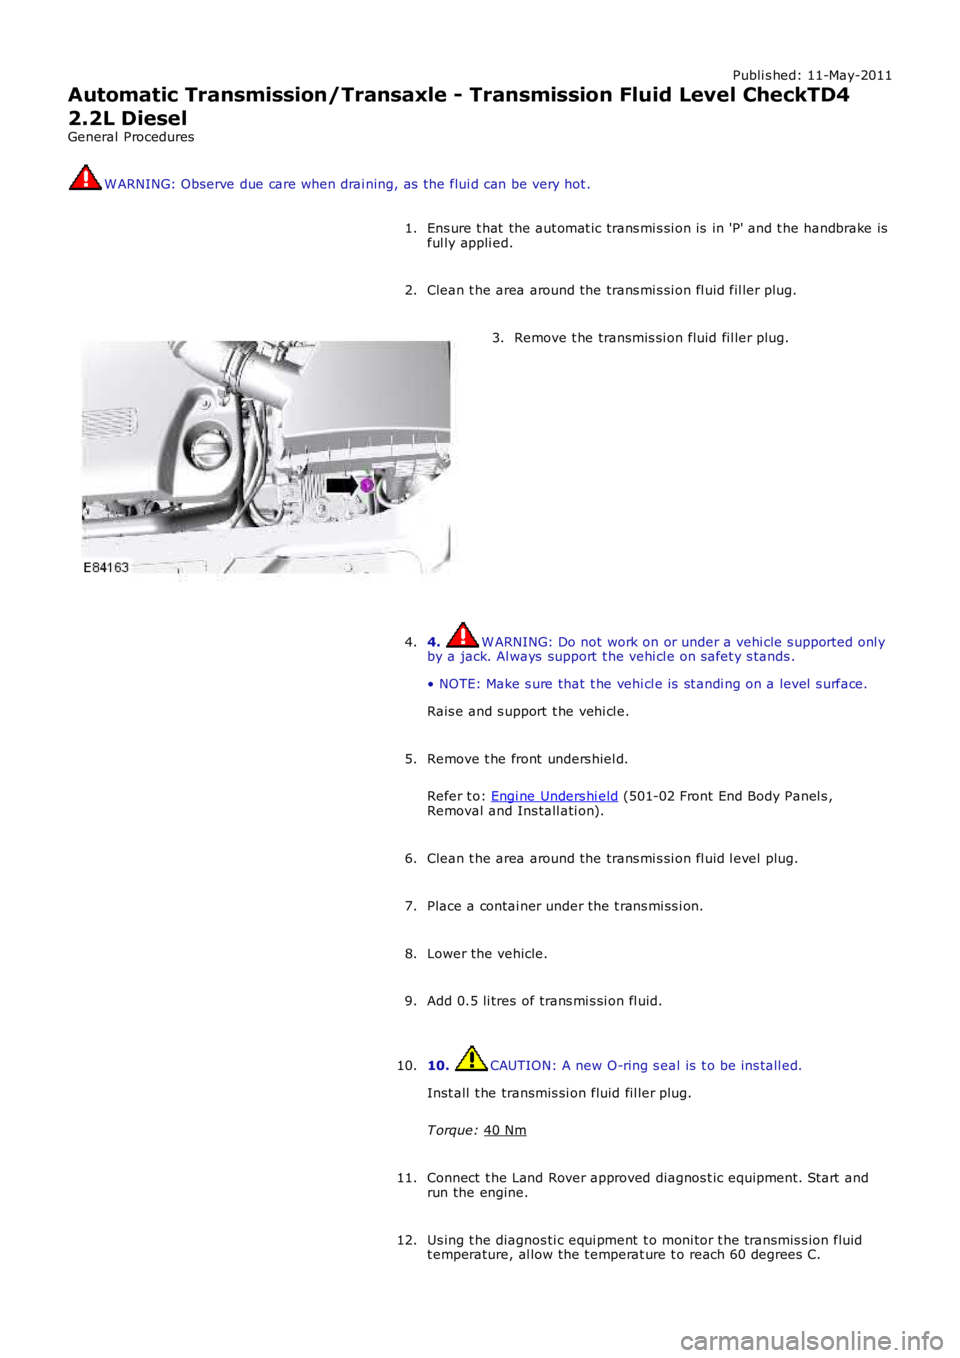 LAND ROVER FRELANDER 2 2006  Repair Manual Publi s hed: 11-May-2011
Automatic Transmission/Transaxle - Transmission Fluid Level CheckTD4
2.2L Diesel
General Procedures W ARNING: Observe due care when drai ning, as  the flui d can be very hot .